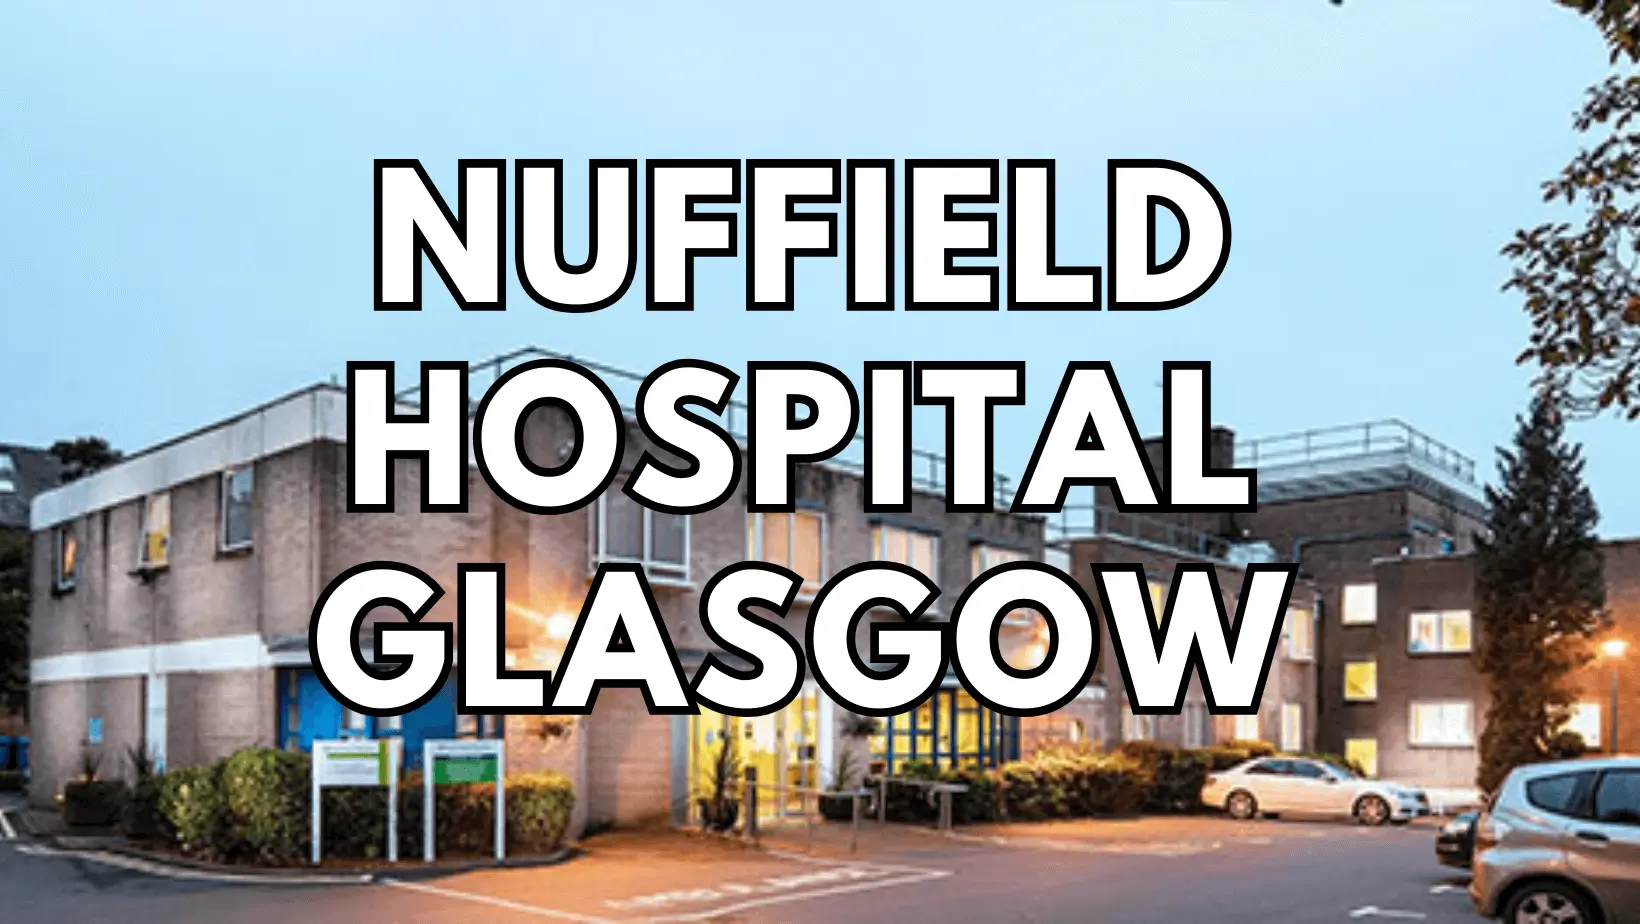 nuffield hospital glasgow featured image